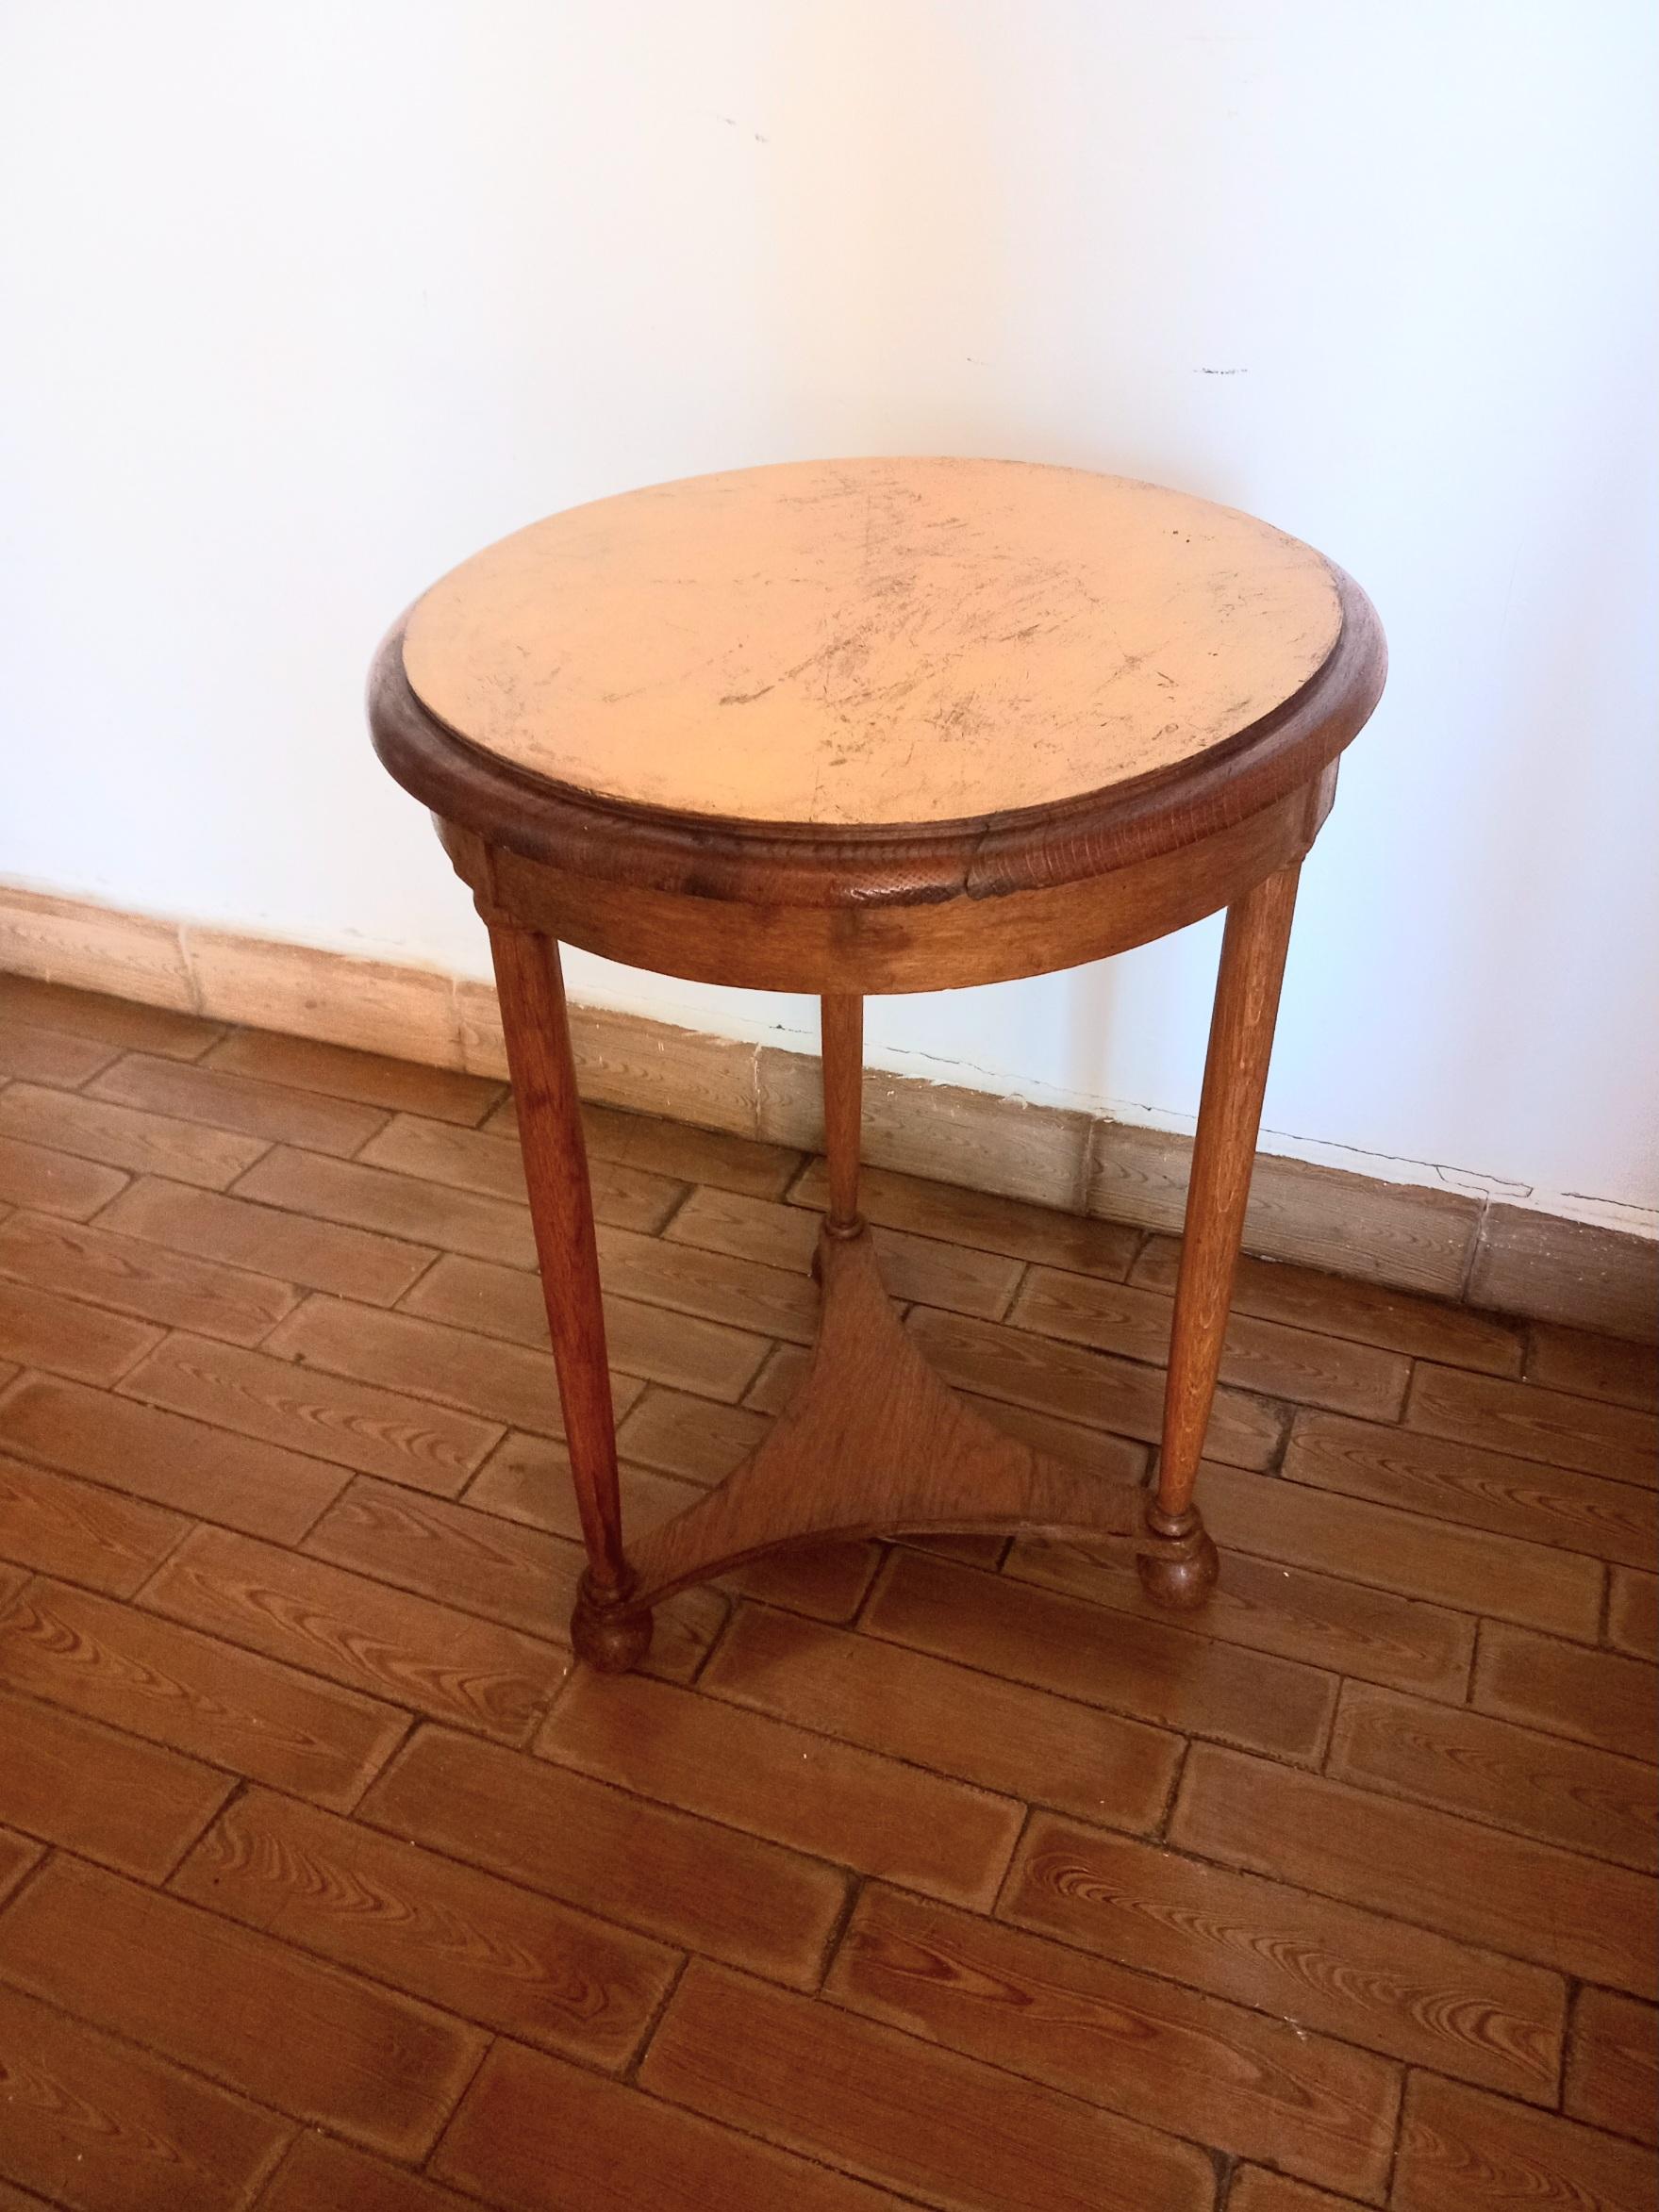 Table supported on three legs topped by a ball
 It is made of beech wood or similar and the upper part has gold leaf.
It is a very functional and beautiful vintage table

 Its condition is good, with details of the passage of time, but it is in very